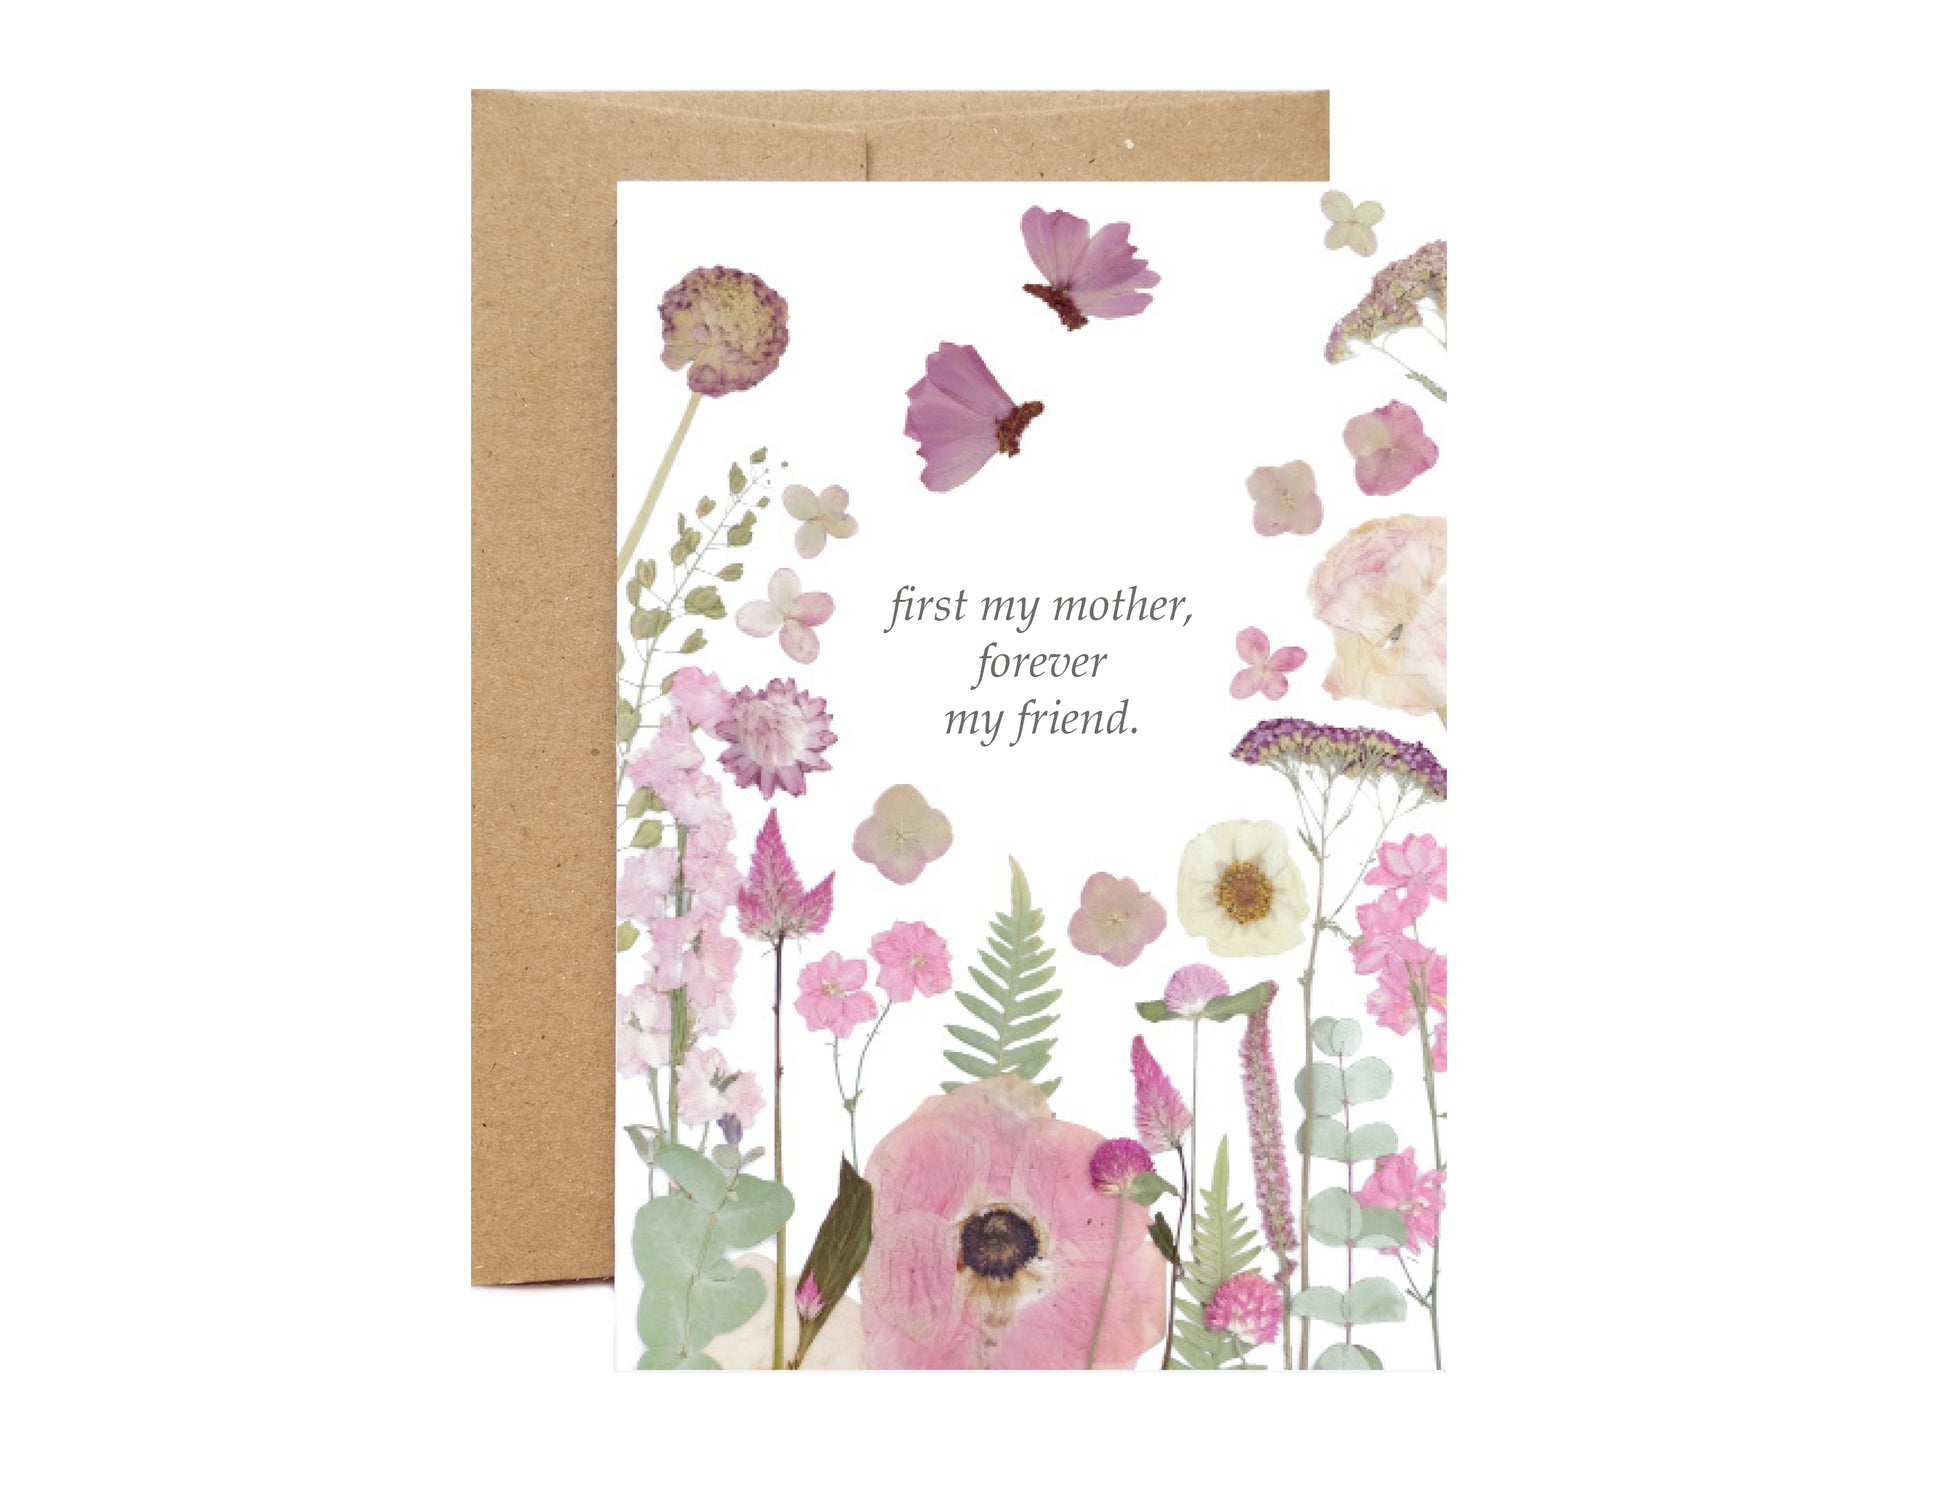 first my mother, forever my friend mothers day card pink gardnen of flowersfirst my mother, forever my friend mothers day card